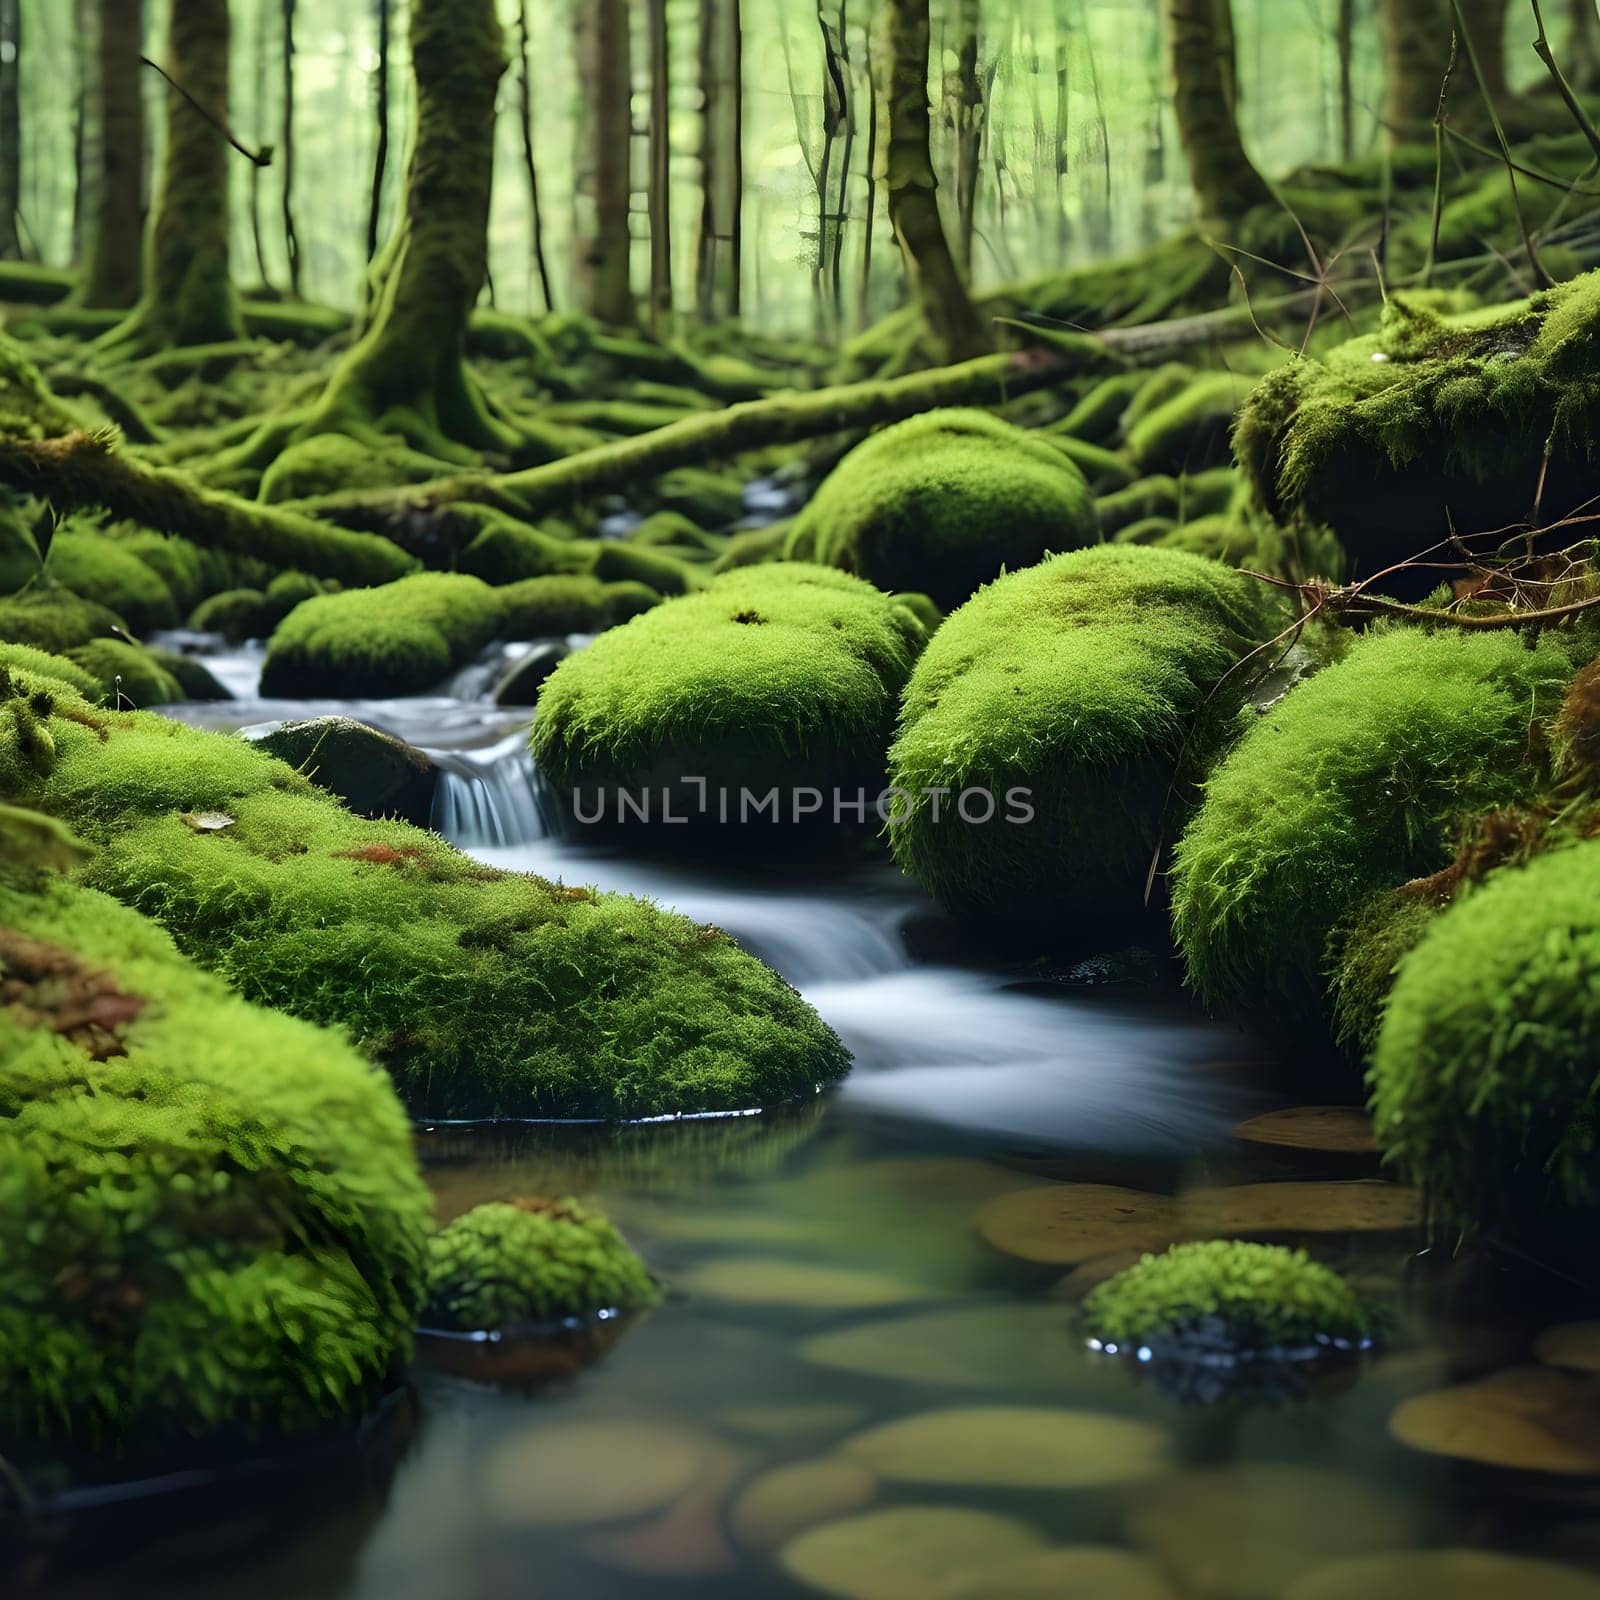 Tranquil River Serenity: Nature's Symphony with Moss by Petrichor